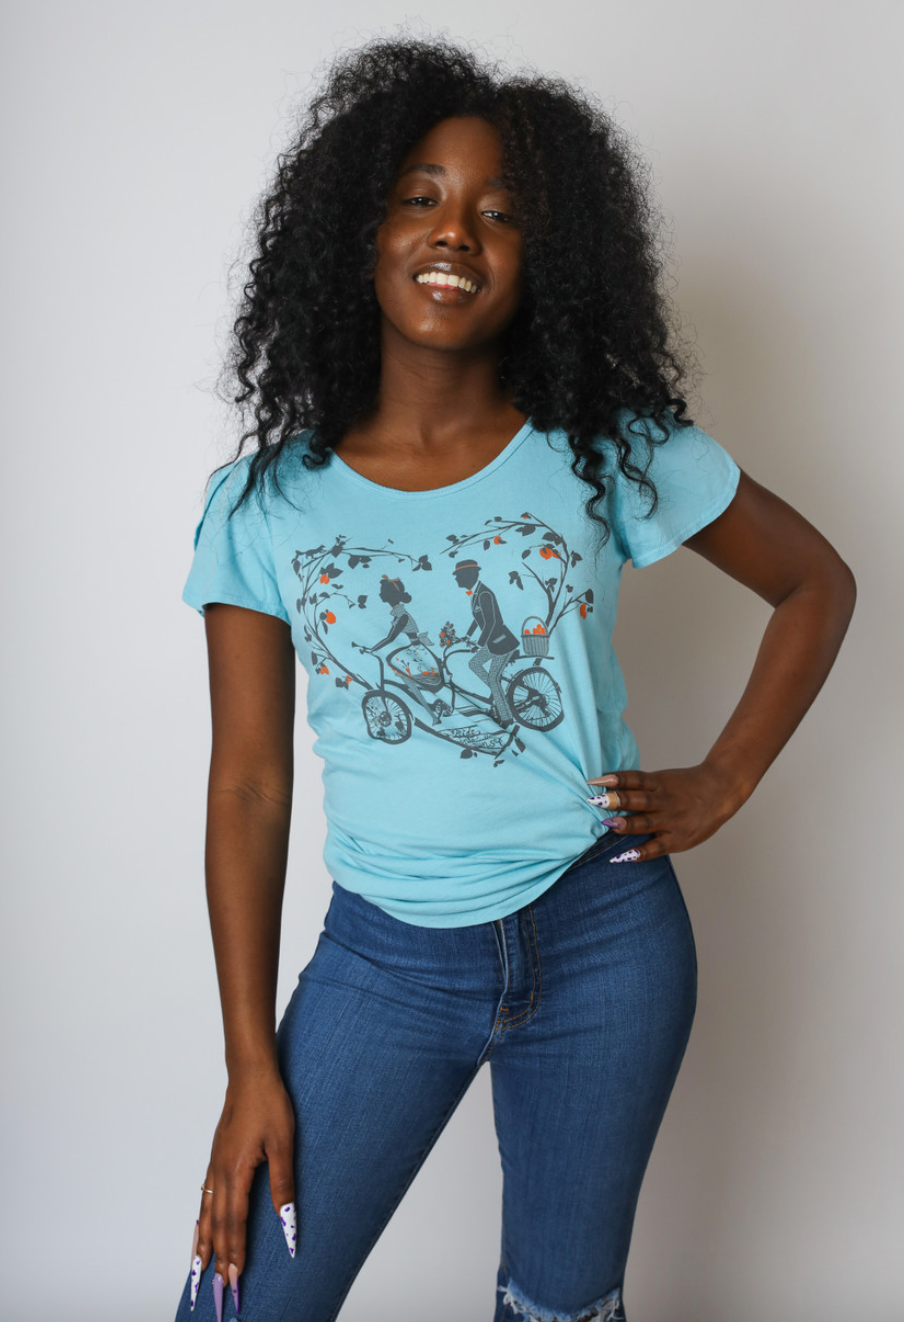 Sky blue tee with older couple riding tandem bicycle on African American model